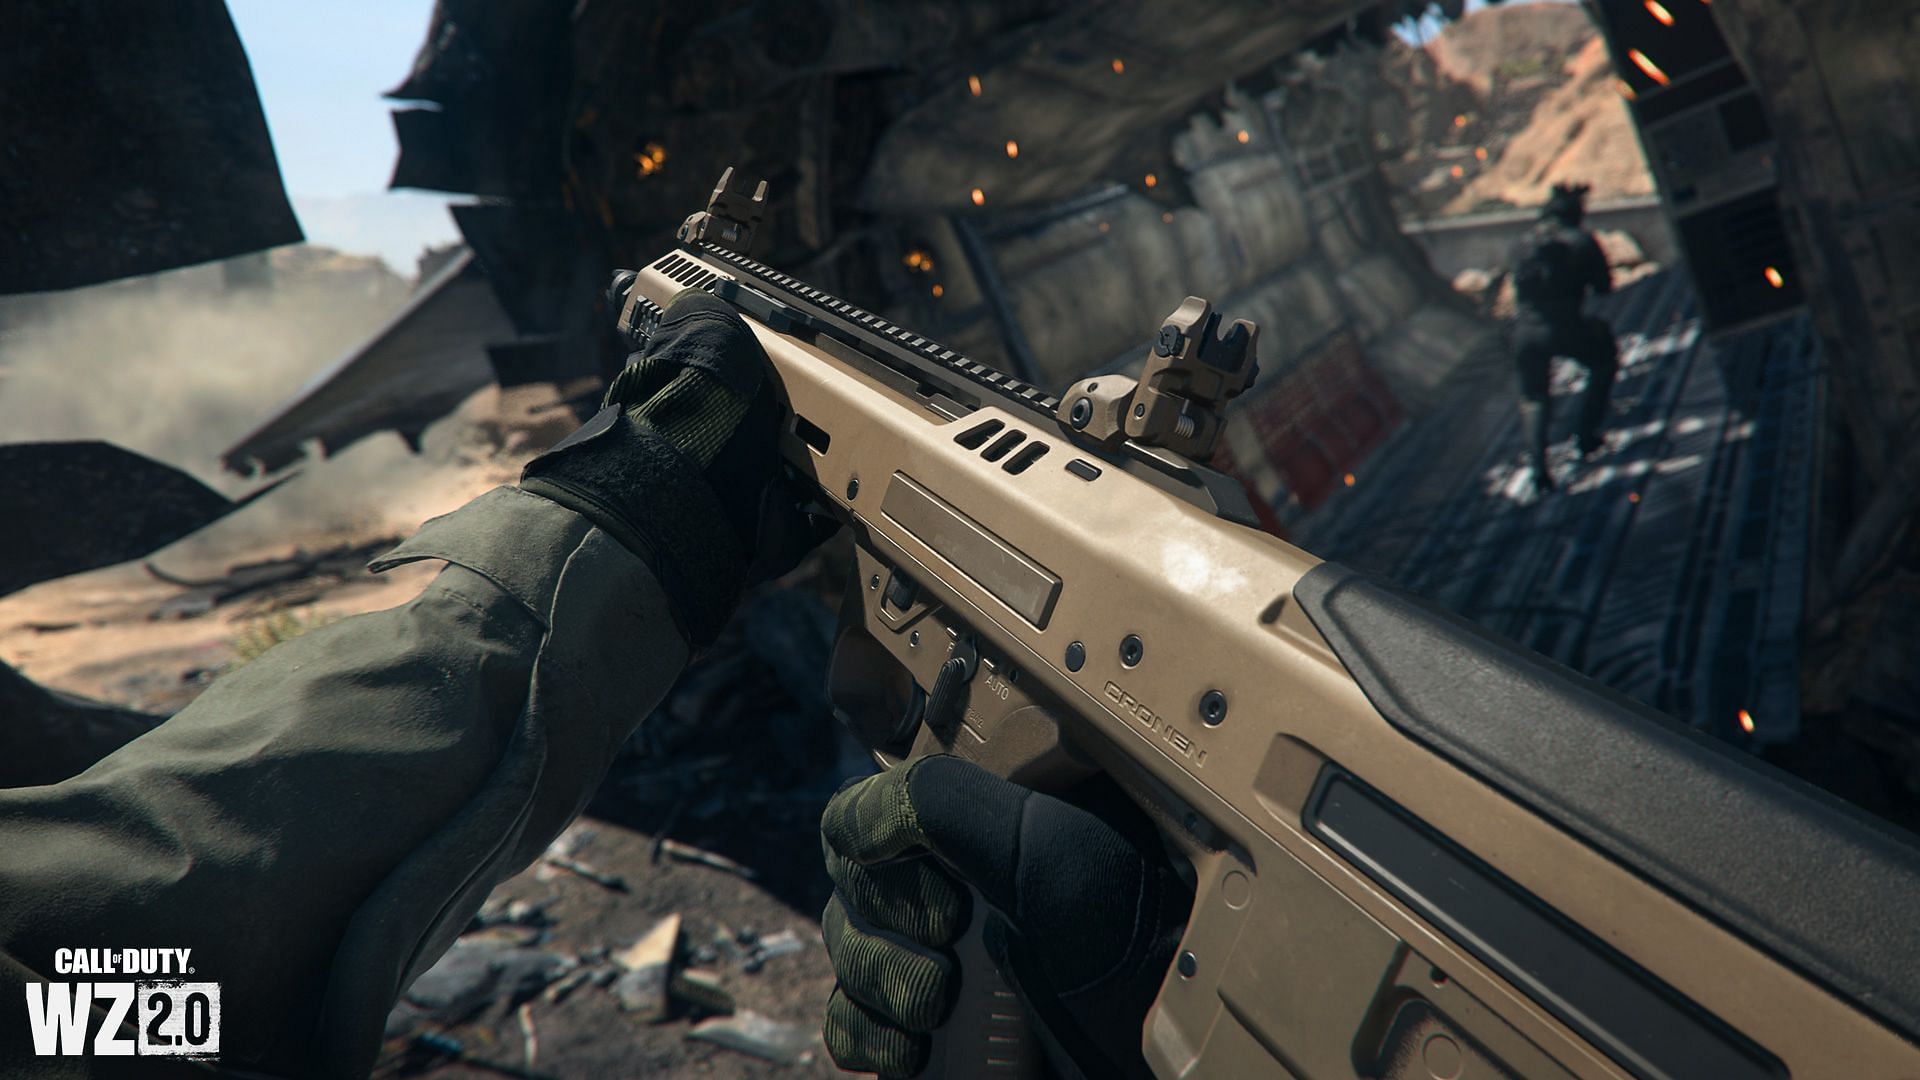 Battle rifle buffs and nerfs of Season 3 Reloaded patch of Modern Warfare 2 and Warzone 2 (Image via Activision)